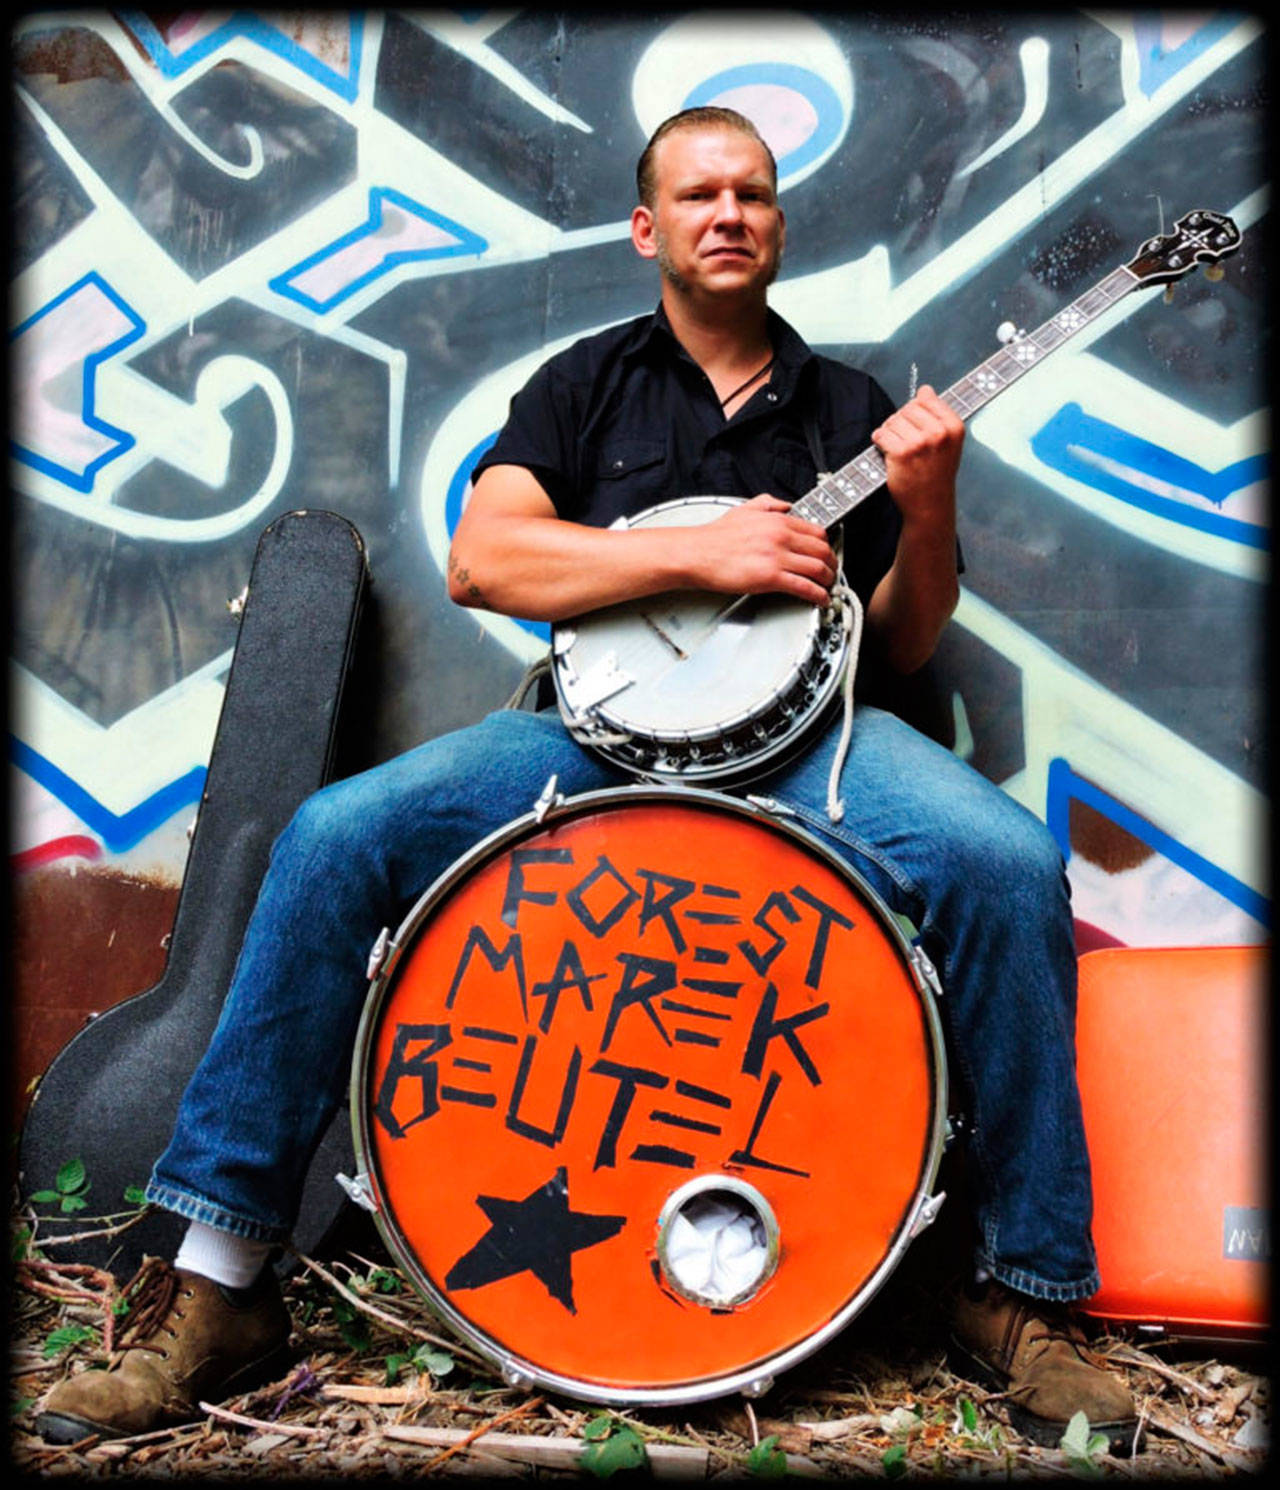 Photo courtesy of the Treehouse Café | Forest Beutel will return to Lynwood’s central stage, at the Treehouse Café, at 8 p.m. Saturday, Aug. 11 for a special free, 21-and-older concert. Donations will be accepted.